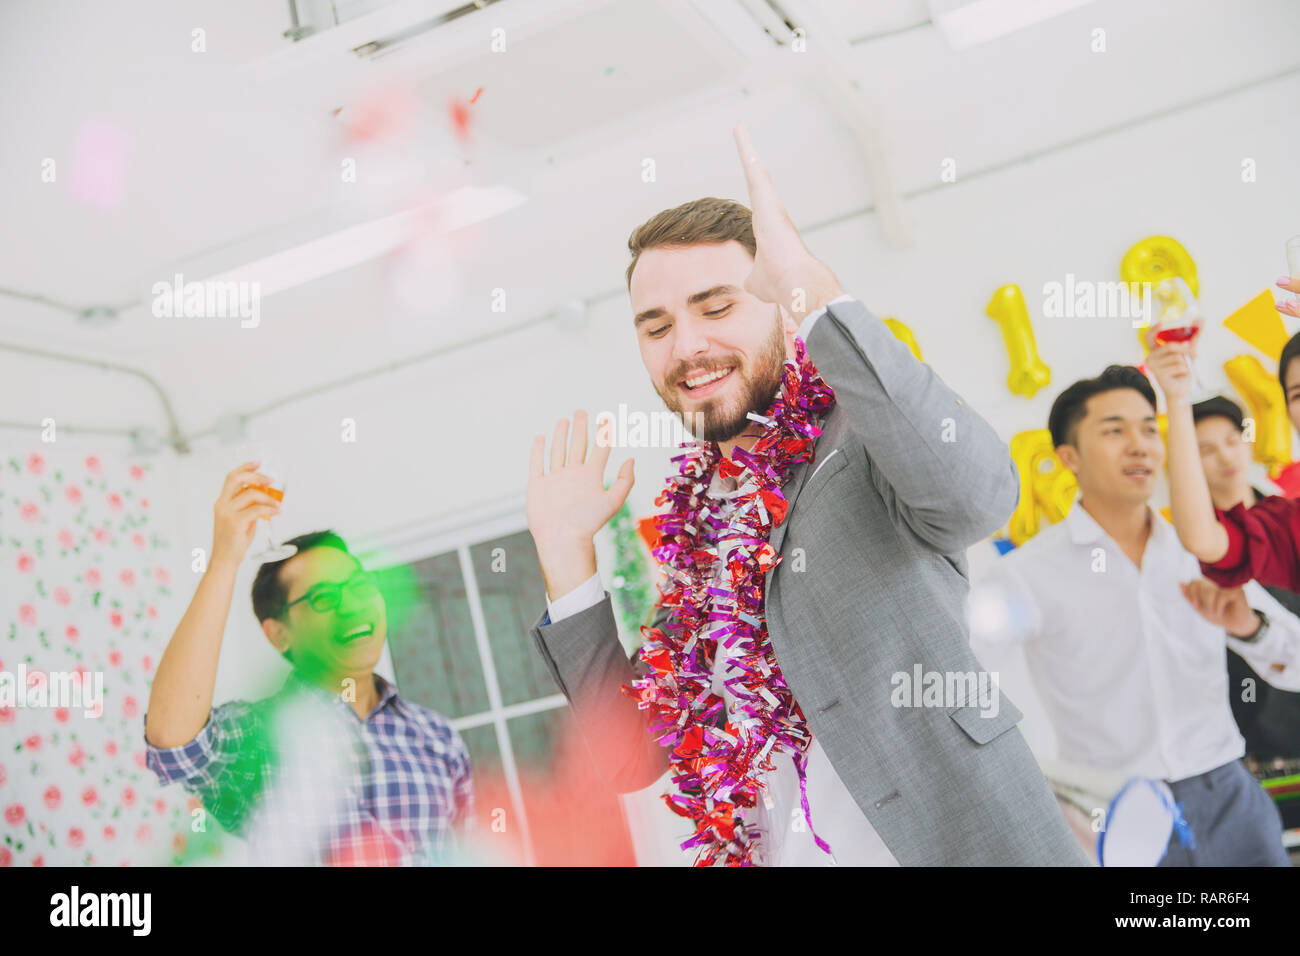 caucasian boss businessman dance in office party new year fun celebration. Stock Photo